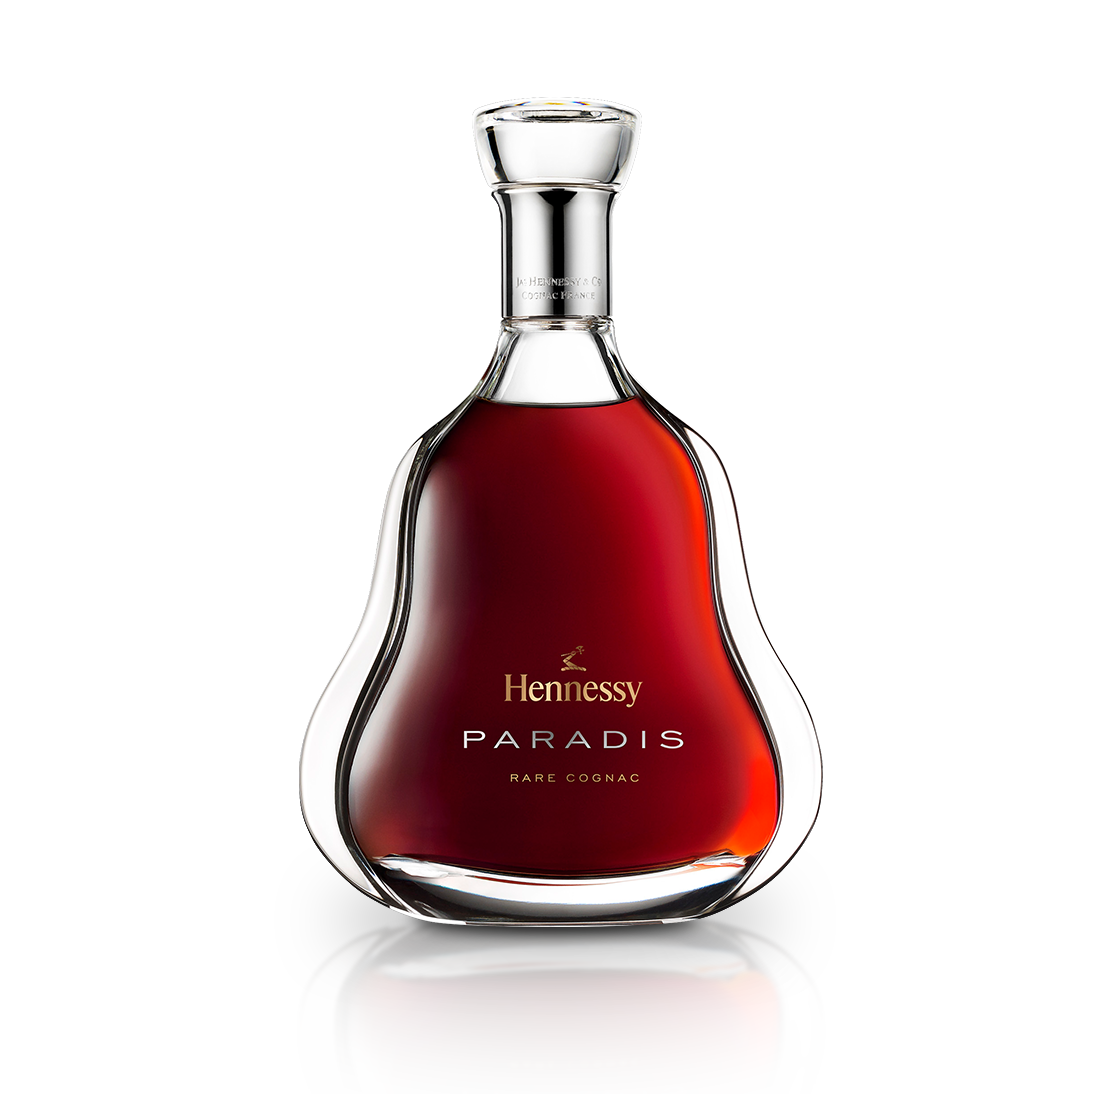 Images of Hennessy | 1120x1120